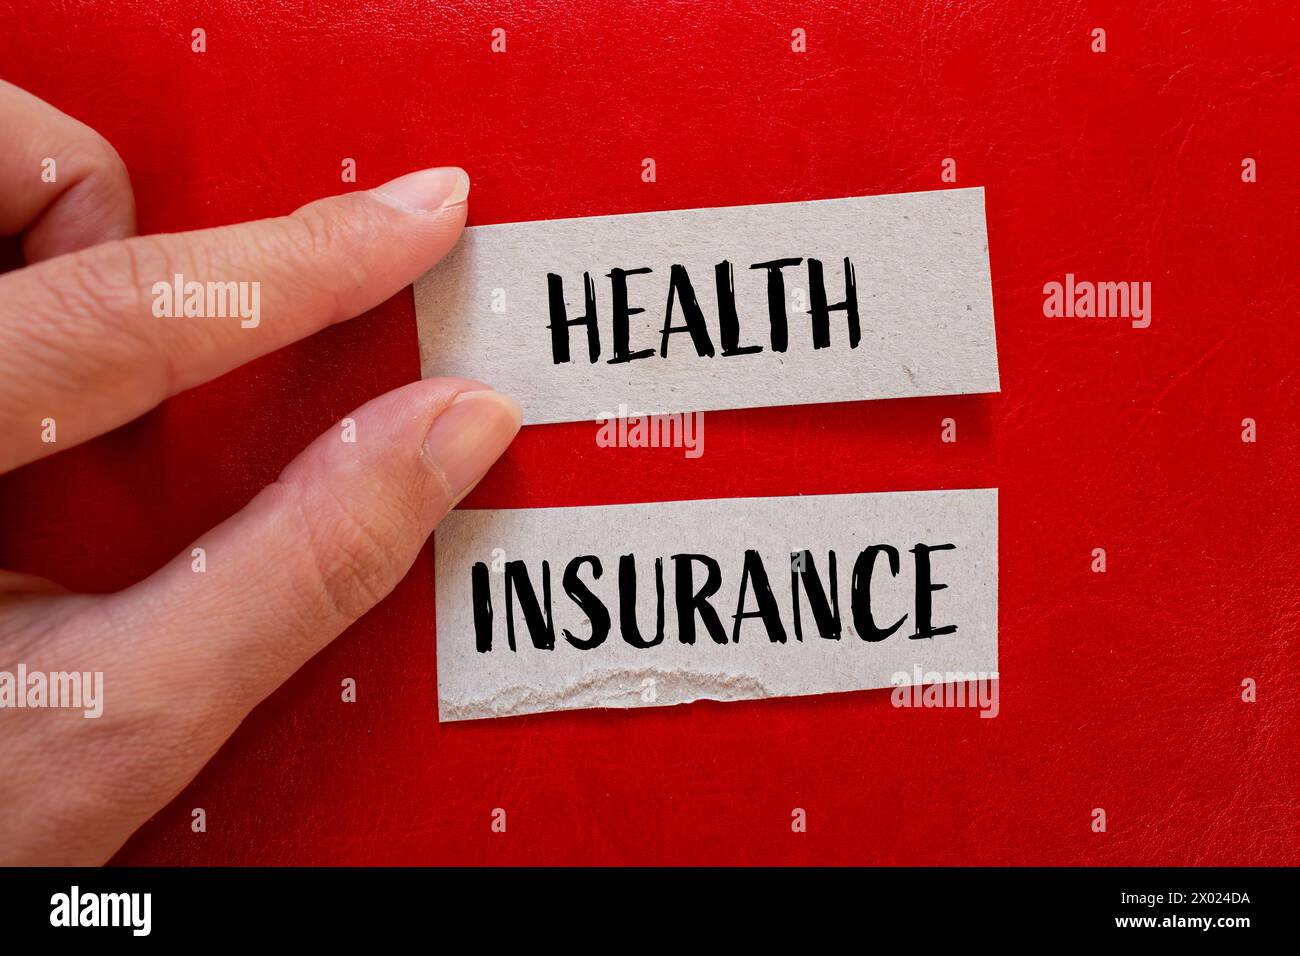 Health insurance words written on ripped paper with red background. Conceptual symbol. Copy space. Stock Photo